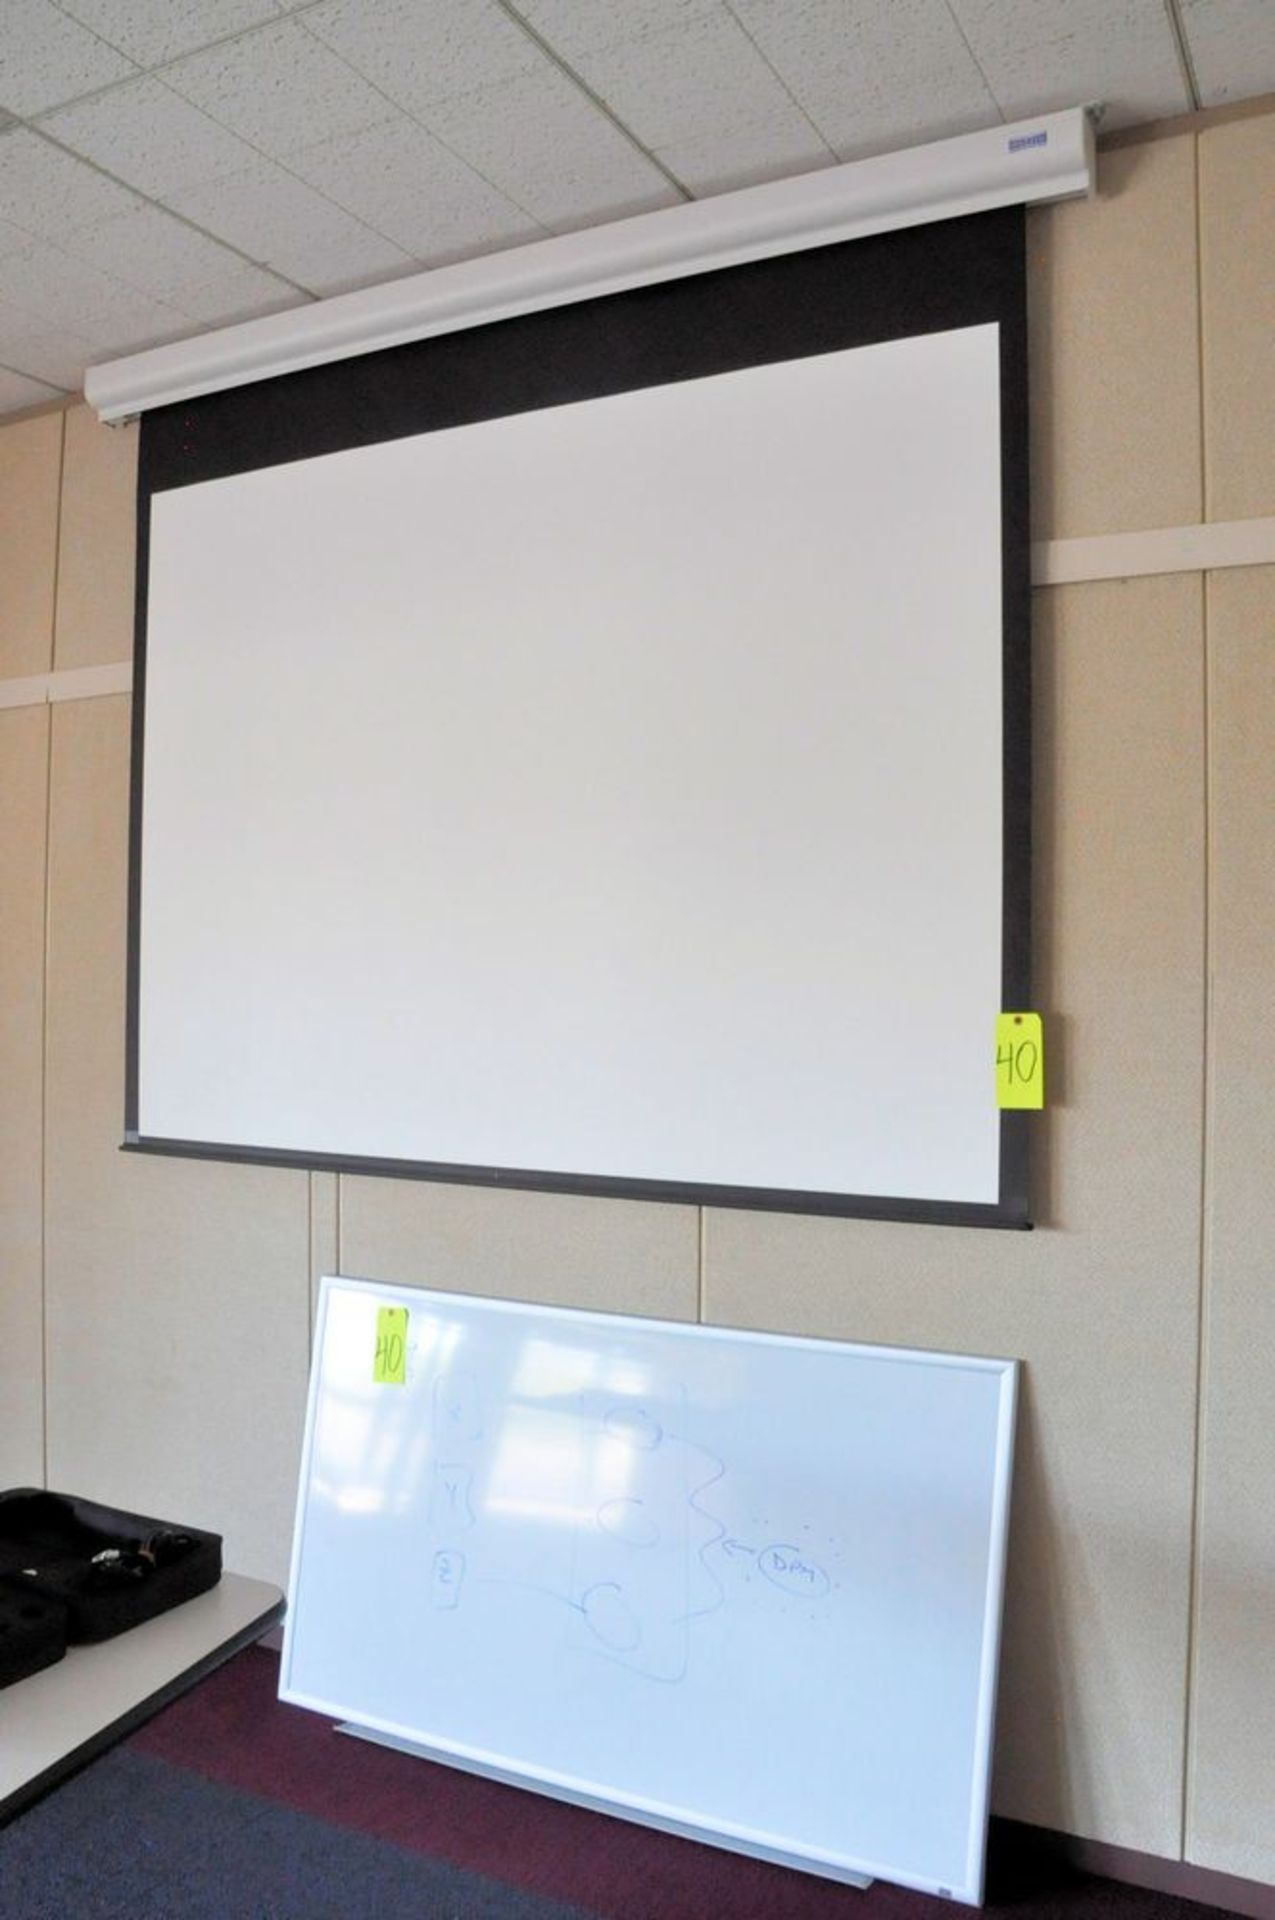 Lot-(1) Dell 2300MP Projector, with Ceiling Mounted Projector Screen, and (1) Dry Erase Board in (1) - Image 3 of 3